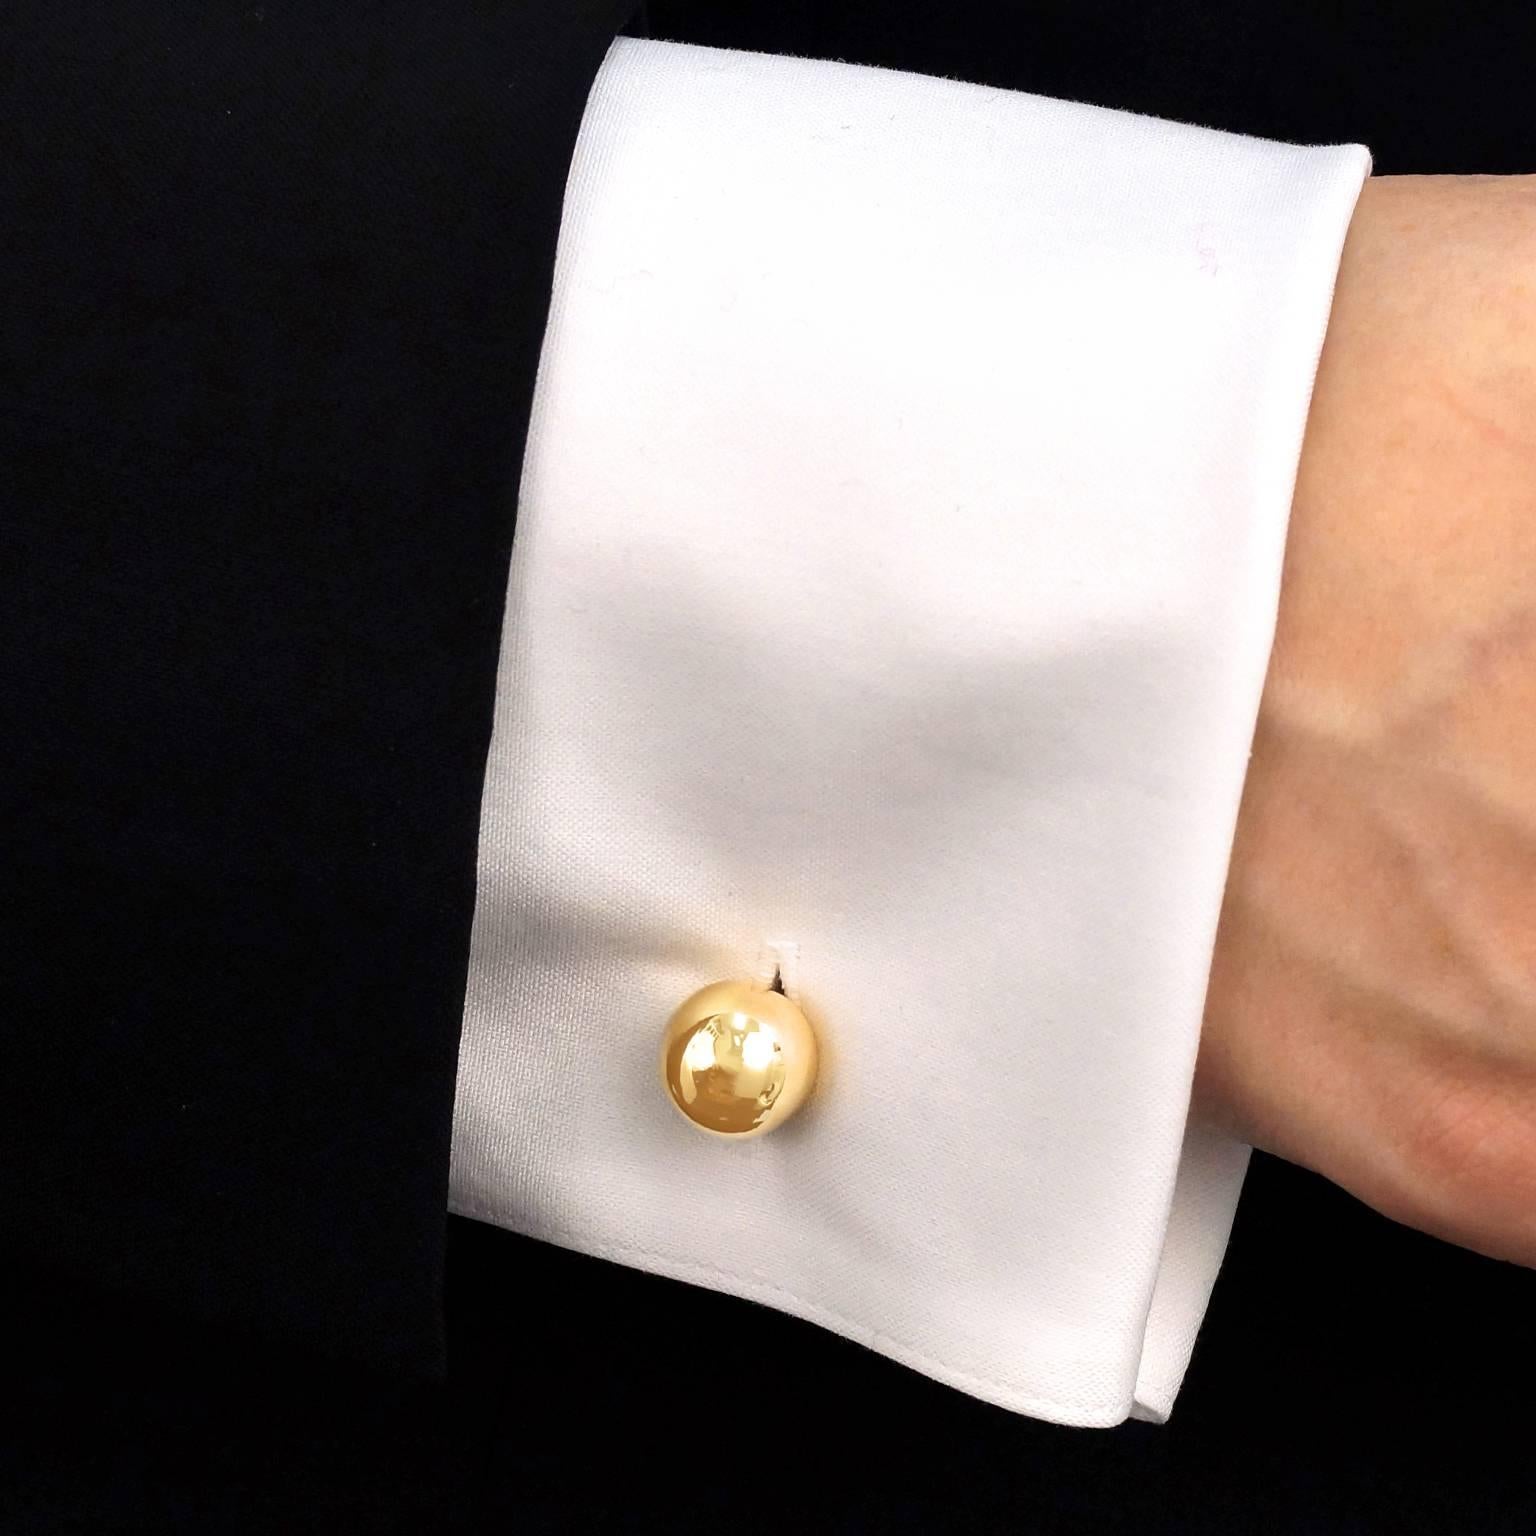 Circa 1950s, 14k, Cartier, New York. These impossibly stylish gold cufflinks from Cartier are the perfect finishing touch to an impeccable suit. Made in polished fourteen-karat gold to Cartier New York’s legendary standards, they have a lovely feel